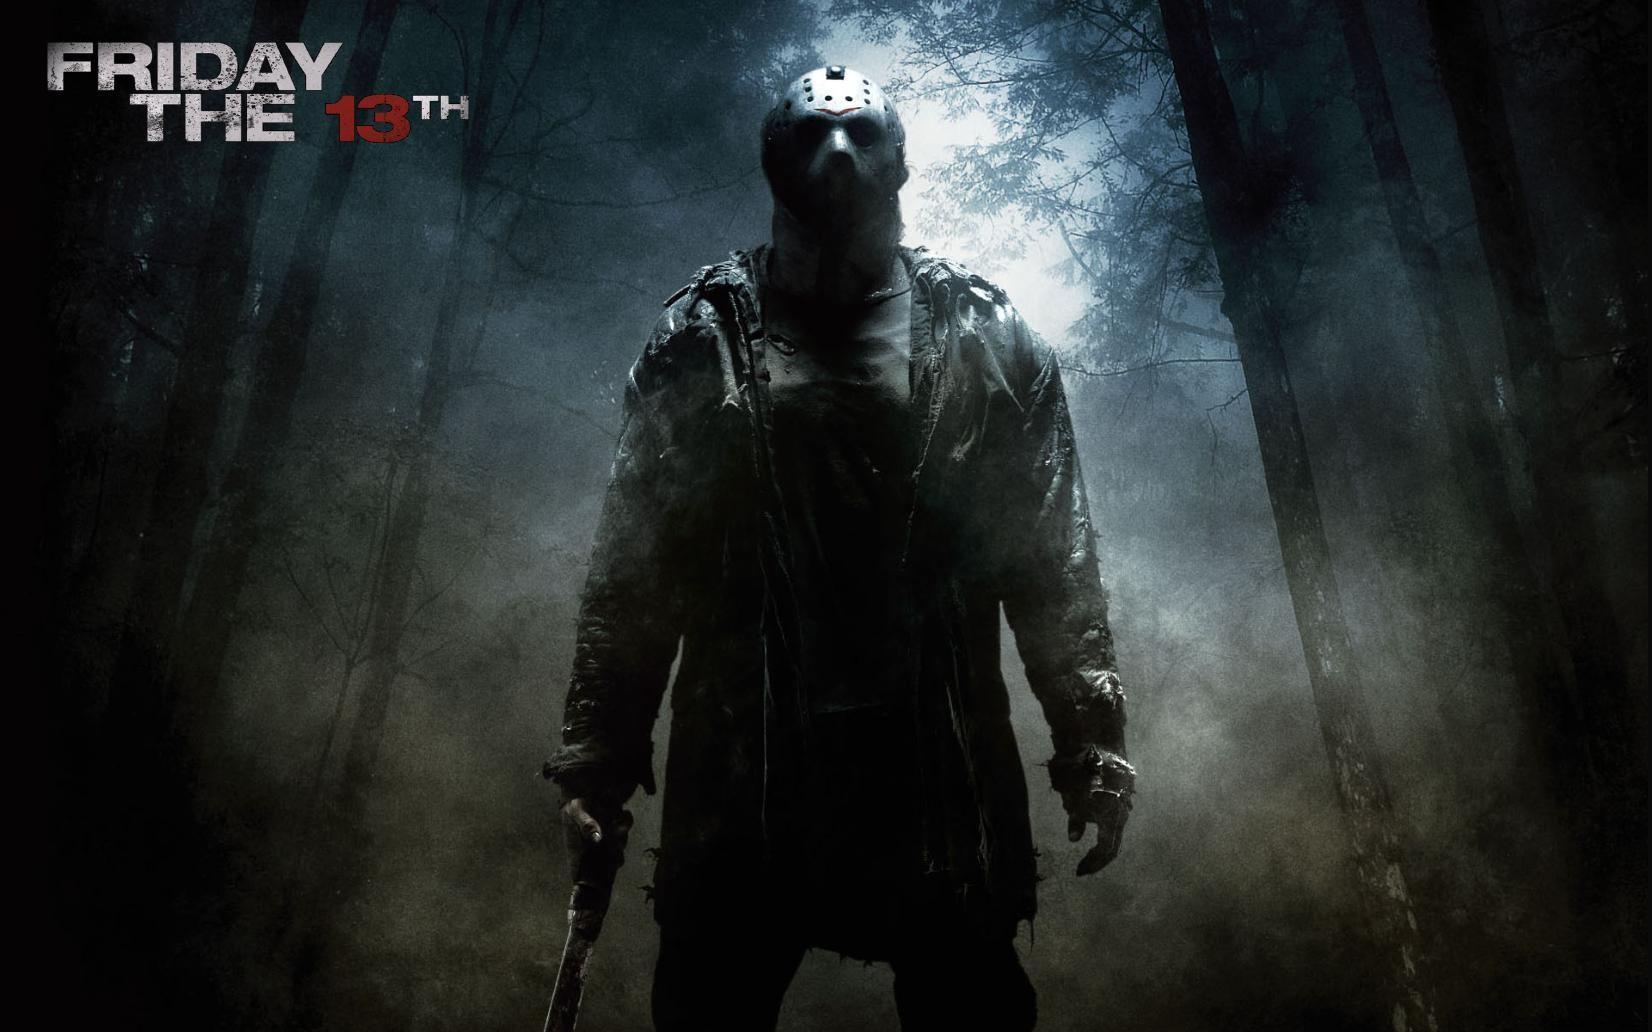 Watch more like Jason Voorhees Friday The 13